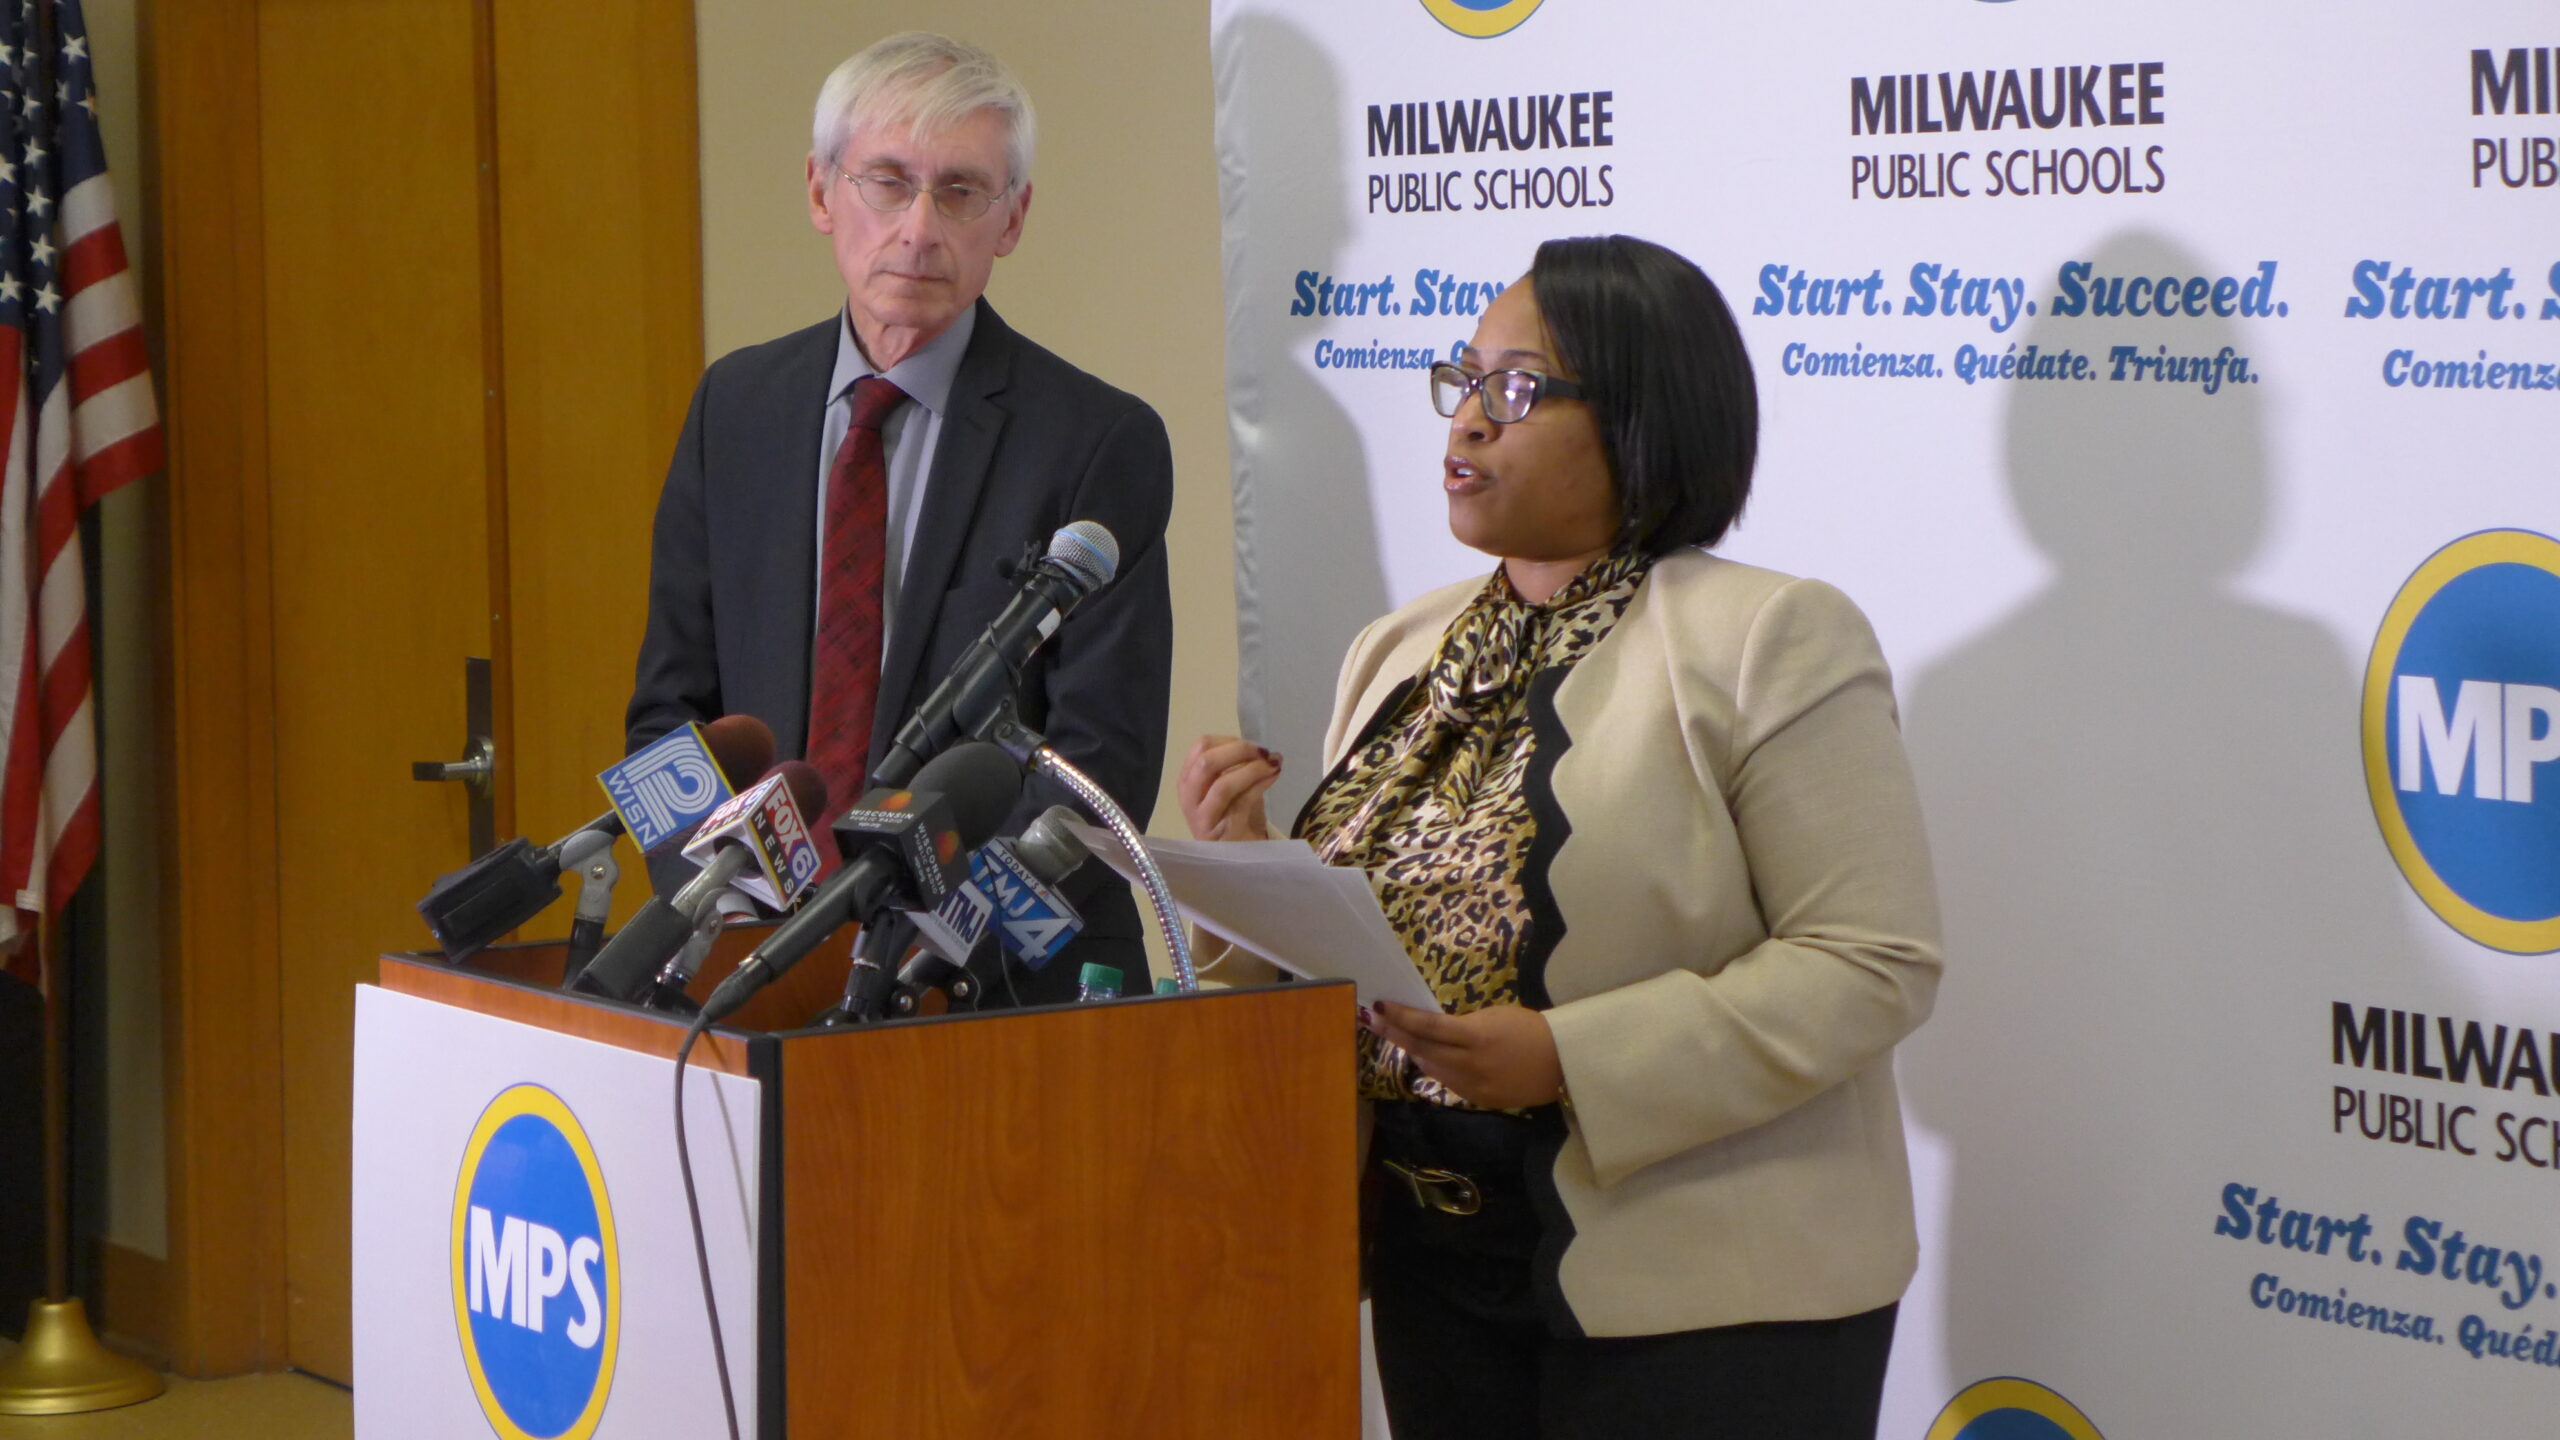 Milwaukee Public Schools Superintendent Darienne Driver and Wisconsin Department of Public Instruction Superintendent Tony Evers